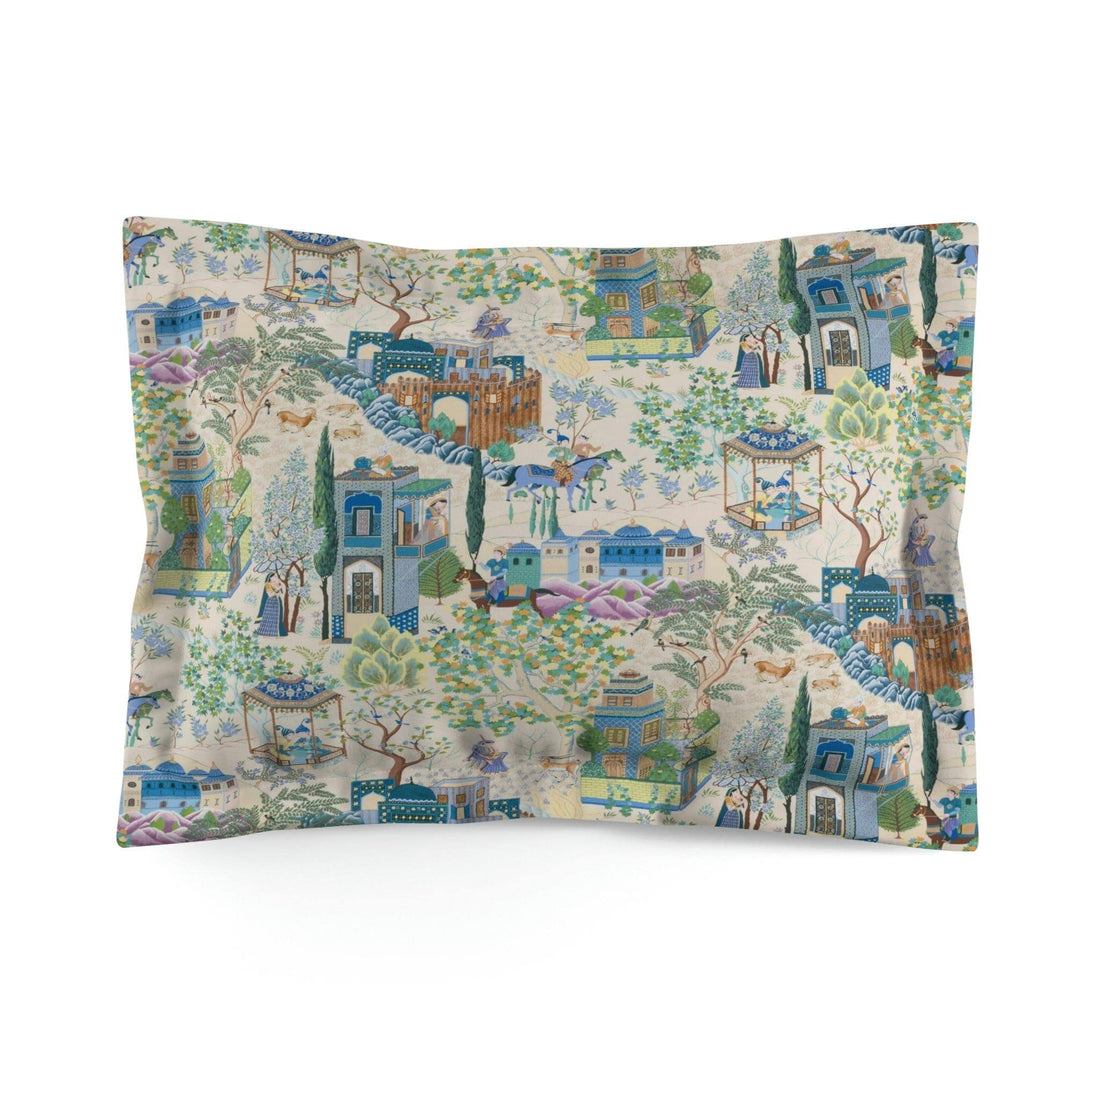 Kate McEnroe New York Vintage Toile De Jouy Pillow Sham, Blue and Green Floral Print Pillow Cover, Traditional Asian Country Scene with Horses, Rustic Chic Decor Pillow Shams